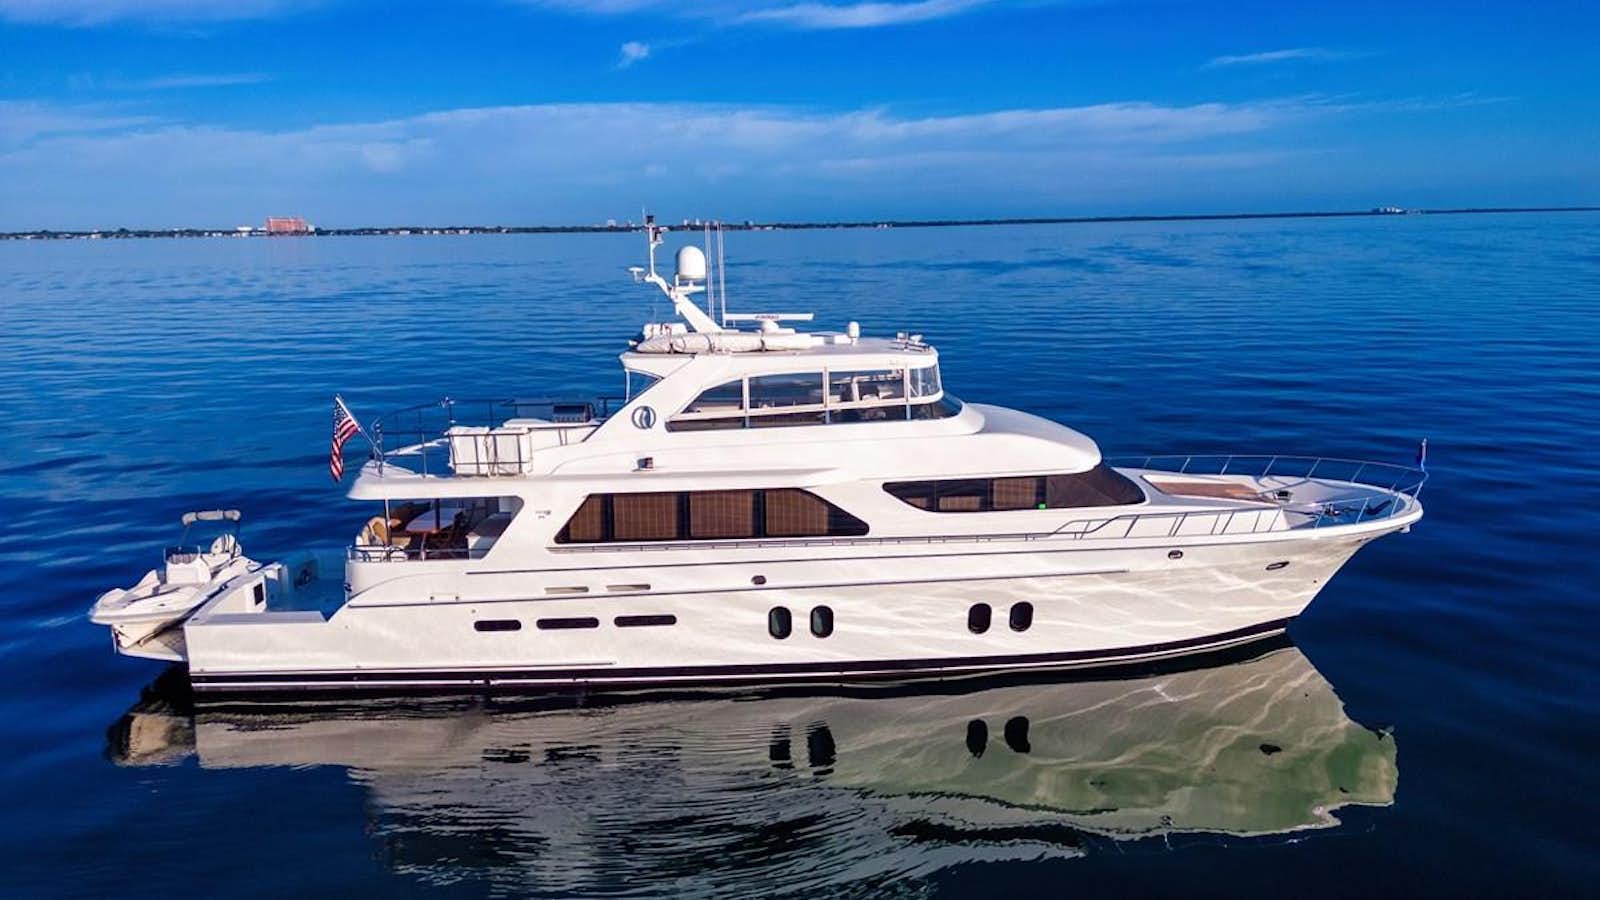 Watch Video for JUS CHILL'N Yacht for Sale